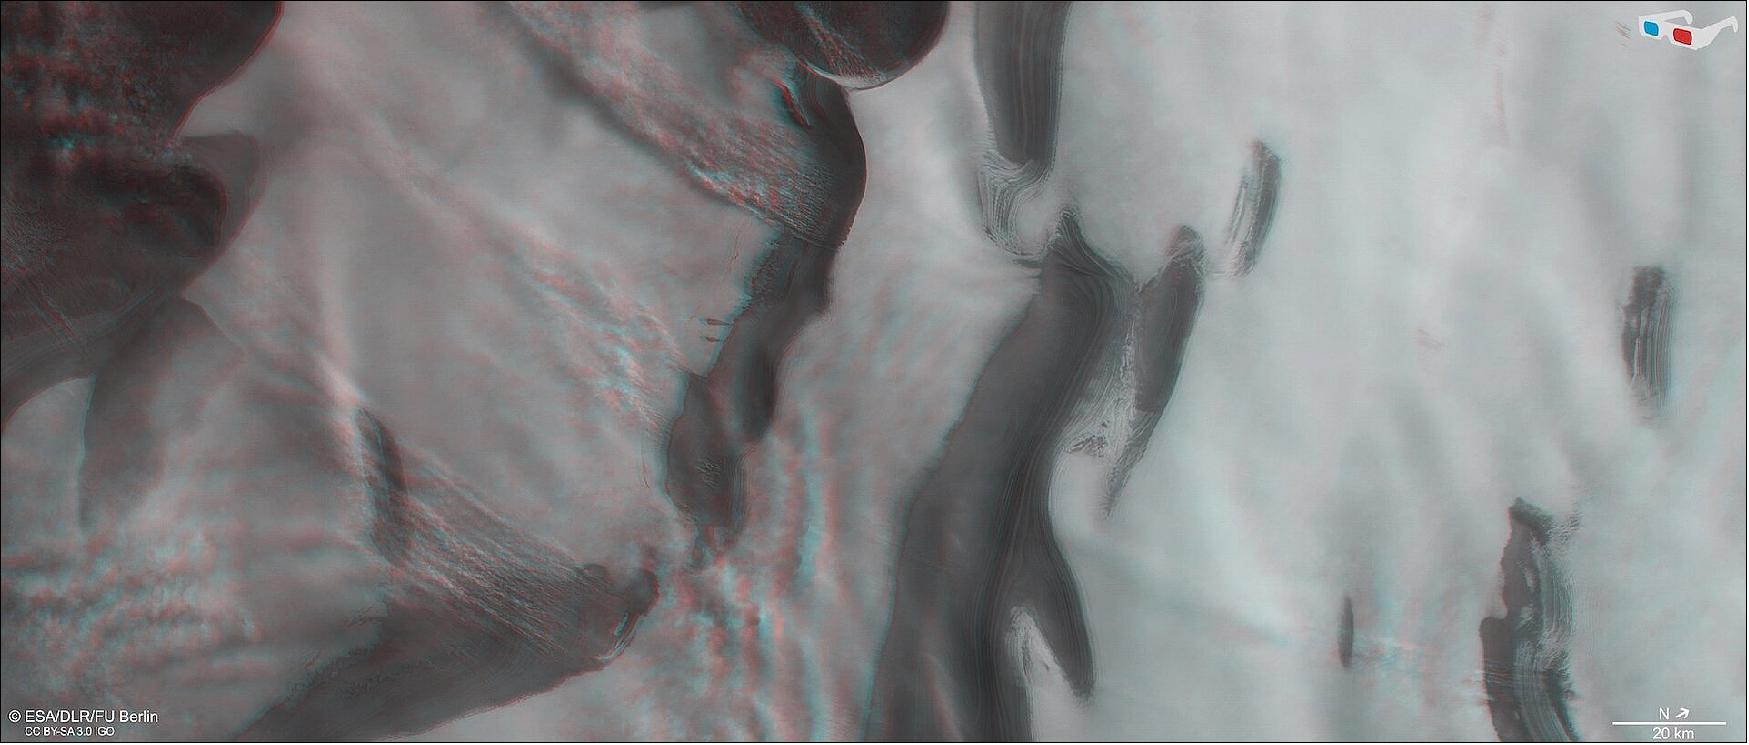 Figure 105: This image shows part of the ice cap at Mars' north pole in 3D when viewed using red-green or red-blue glasses. This anaglyph was derived from data obtained by the nadir and stereo channels of the HRSC on ESA’s Mars Express during spacecraft orbit 3670. It covers a part of the martian surface centered at about 244ºE/85ºN. North is to the upper right (image credit: ESA/DLR/FU Berlin, CC BY-SA 3.0 IGO)